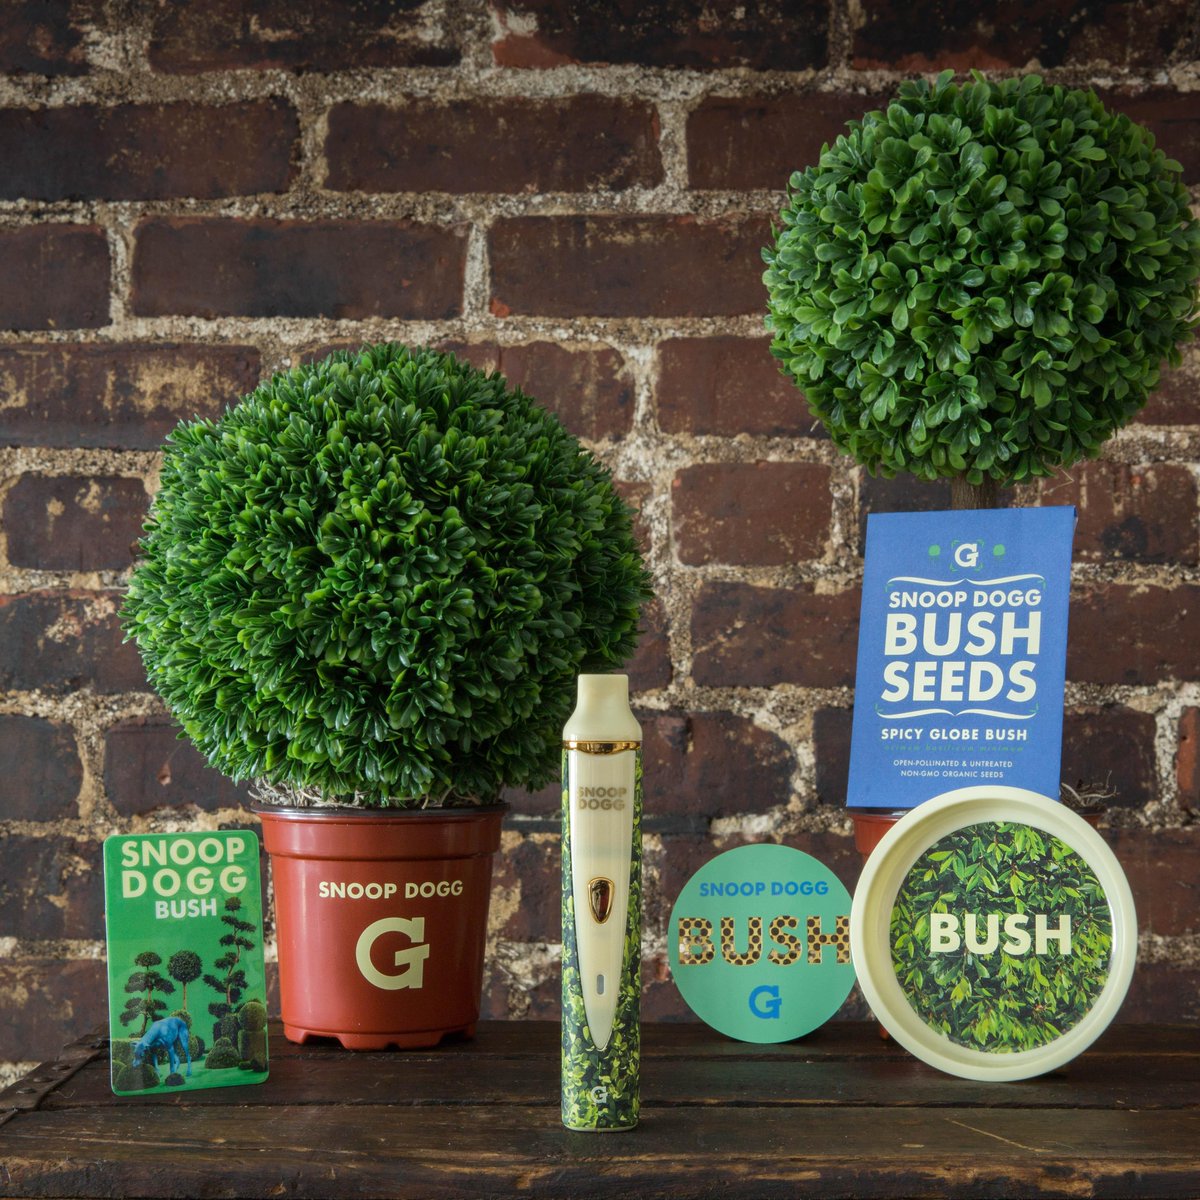 where ya gpens at ?! @GPen #BUSH #GPro is shippin now at http://t.co/clzdpExeEO Get da boxset wit a free DL of #BUSH http://t.co/D7i75inUVe